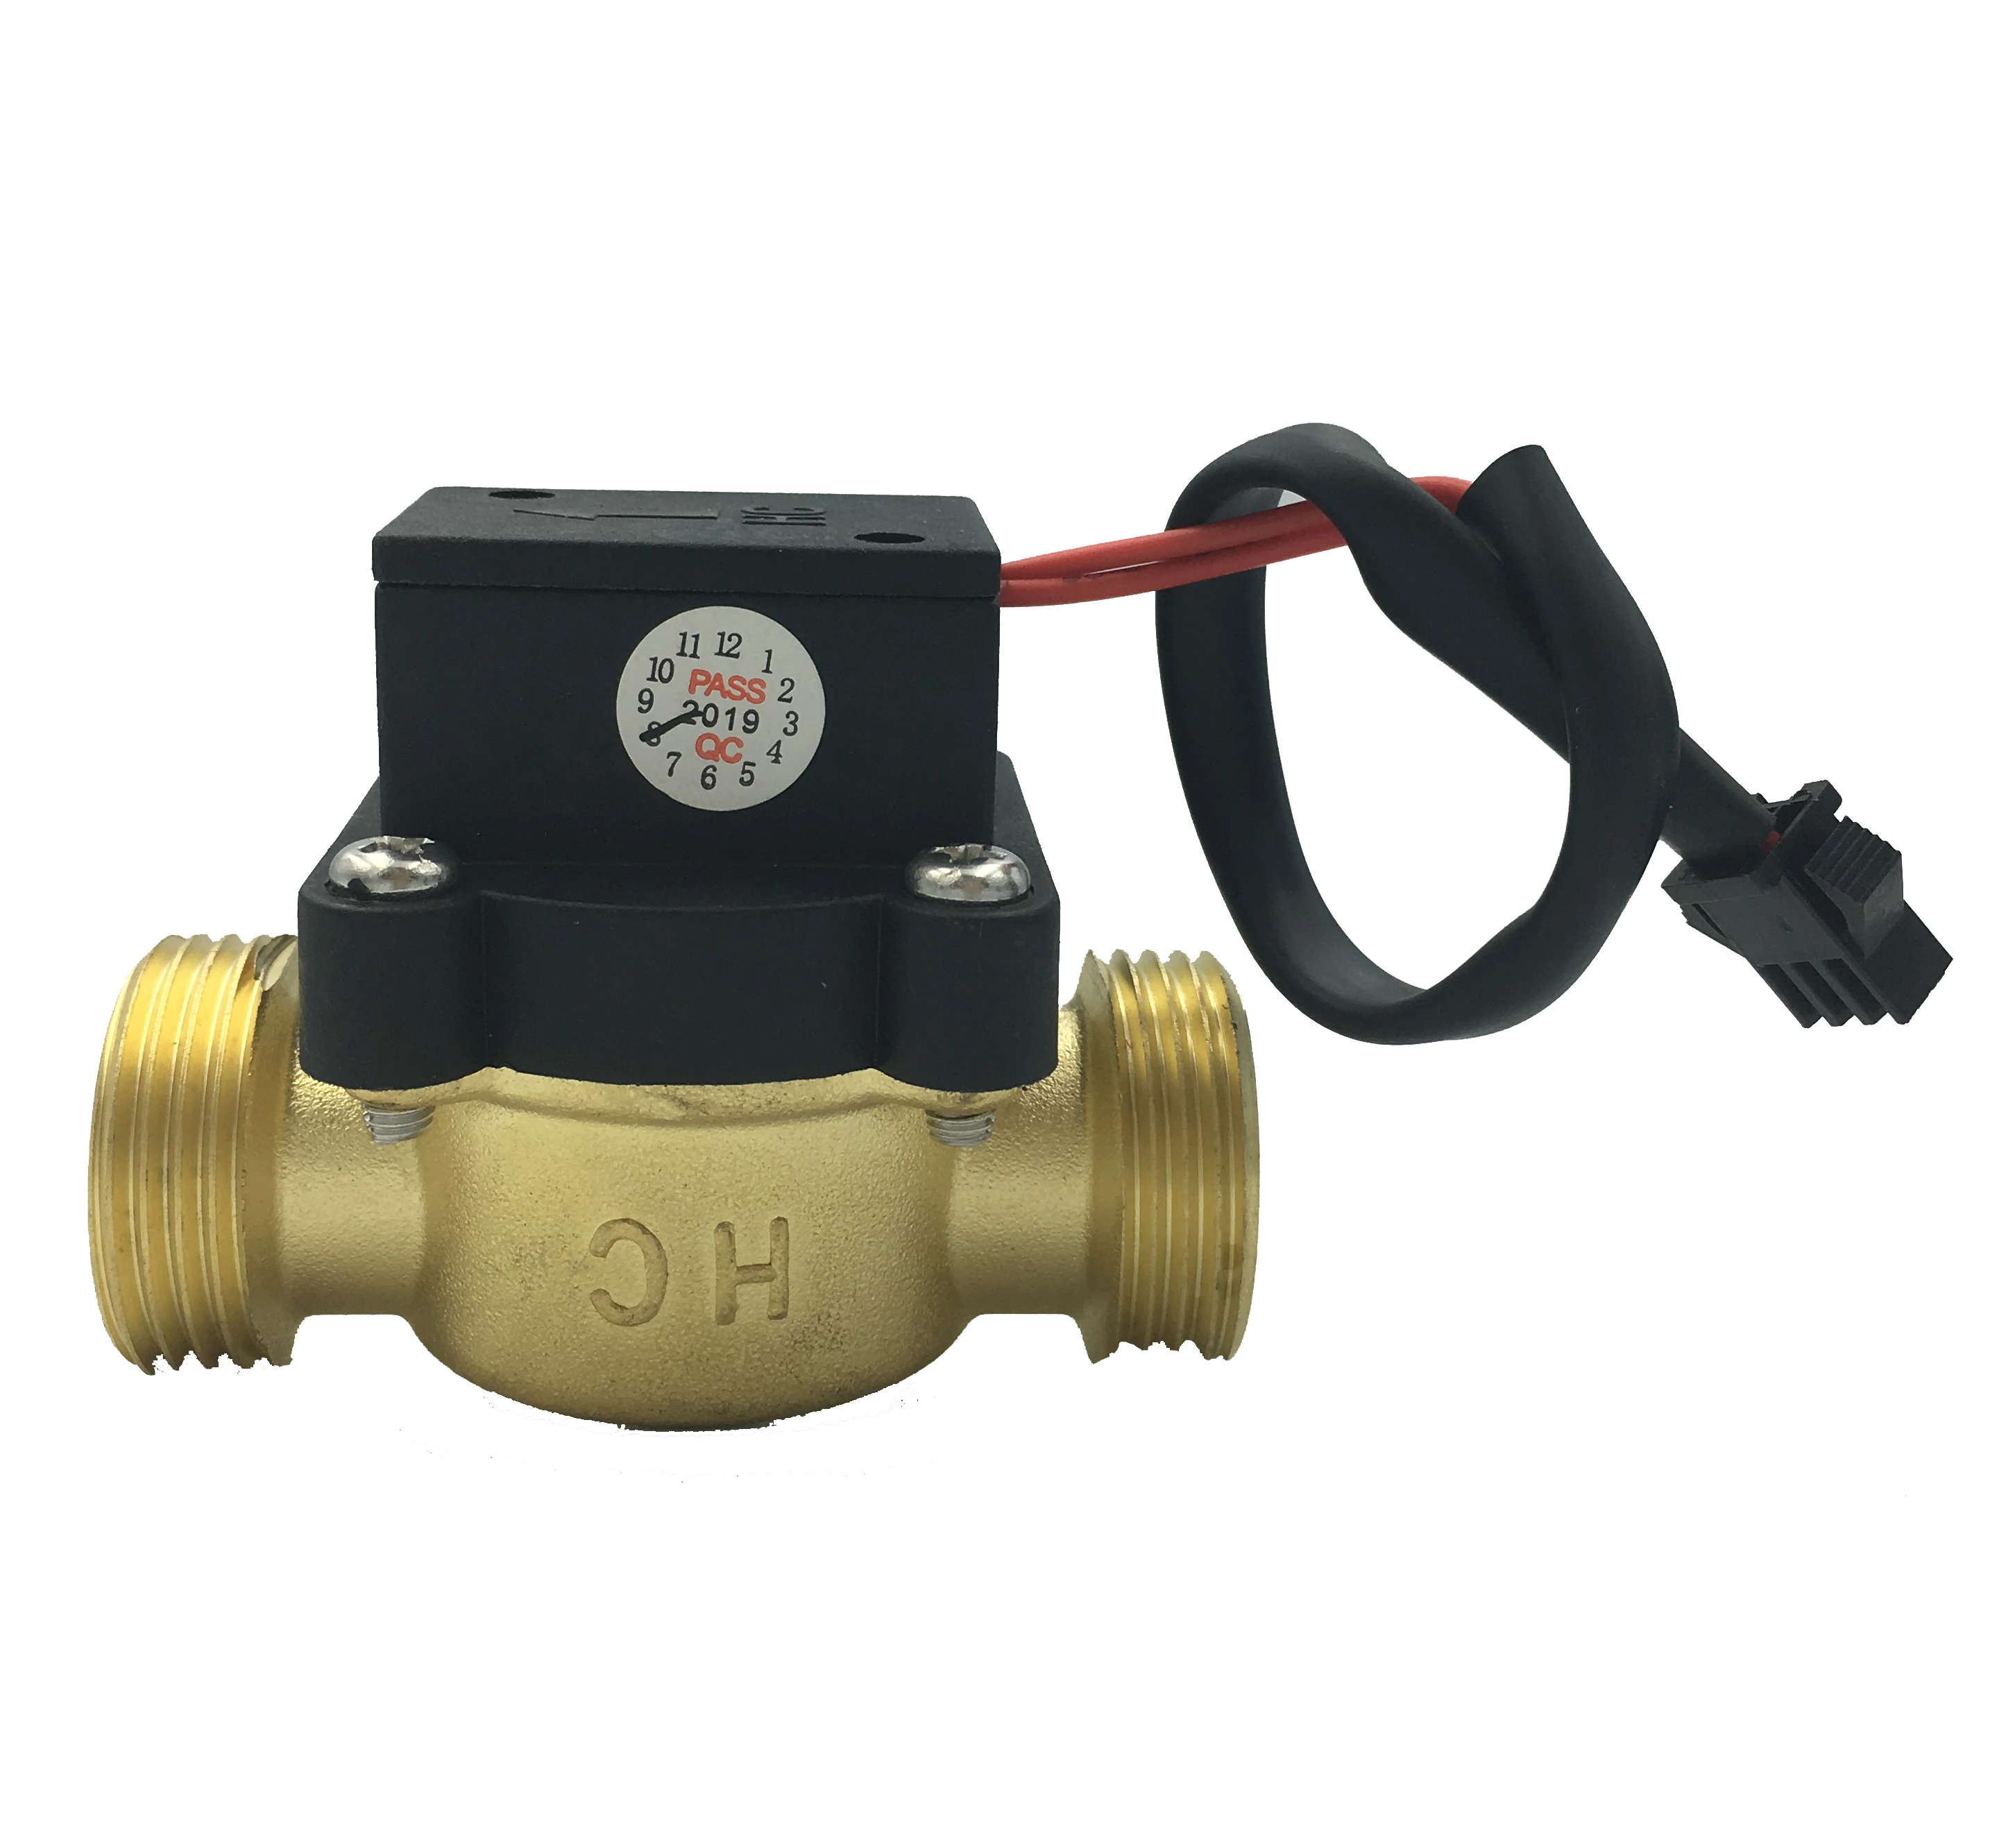 popular water paddle flow switch in pumps electronic water flow/pressure switch